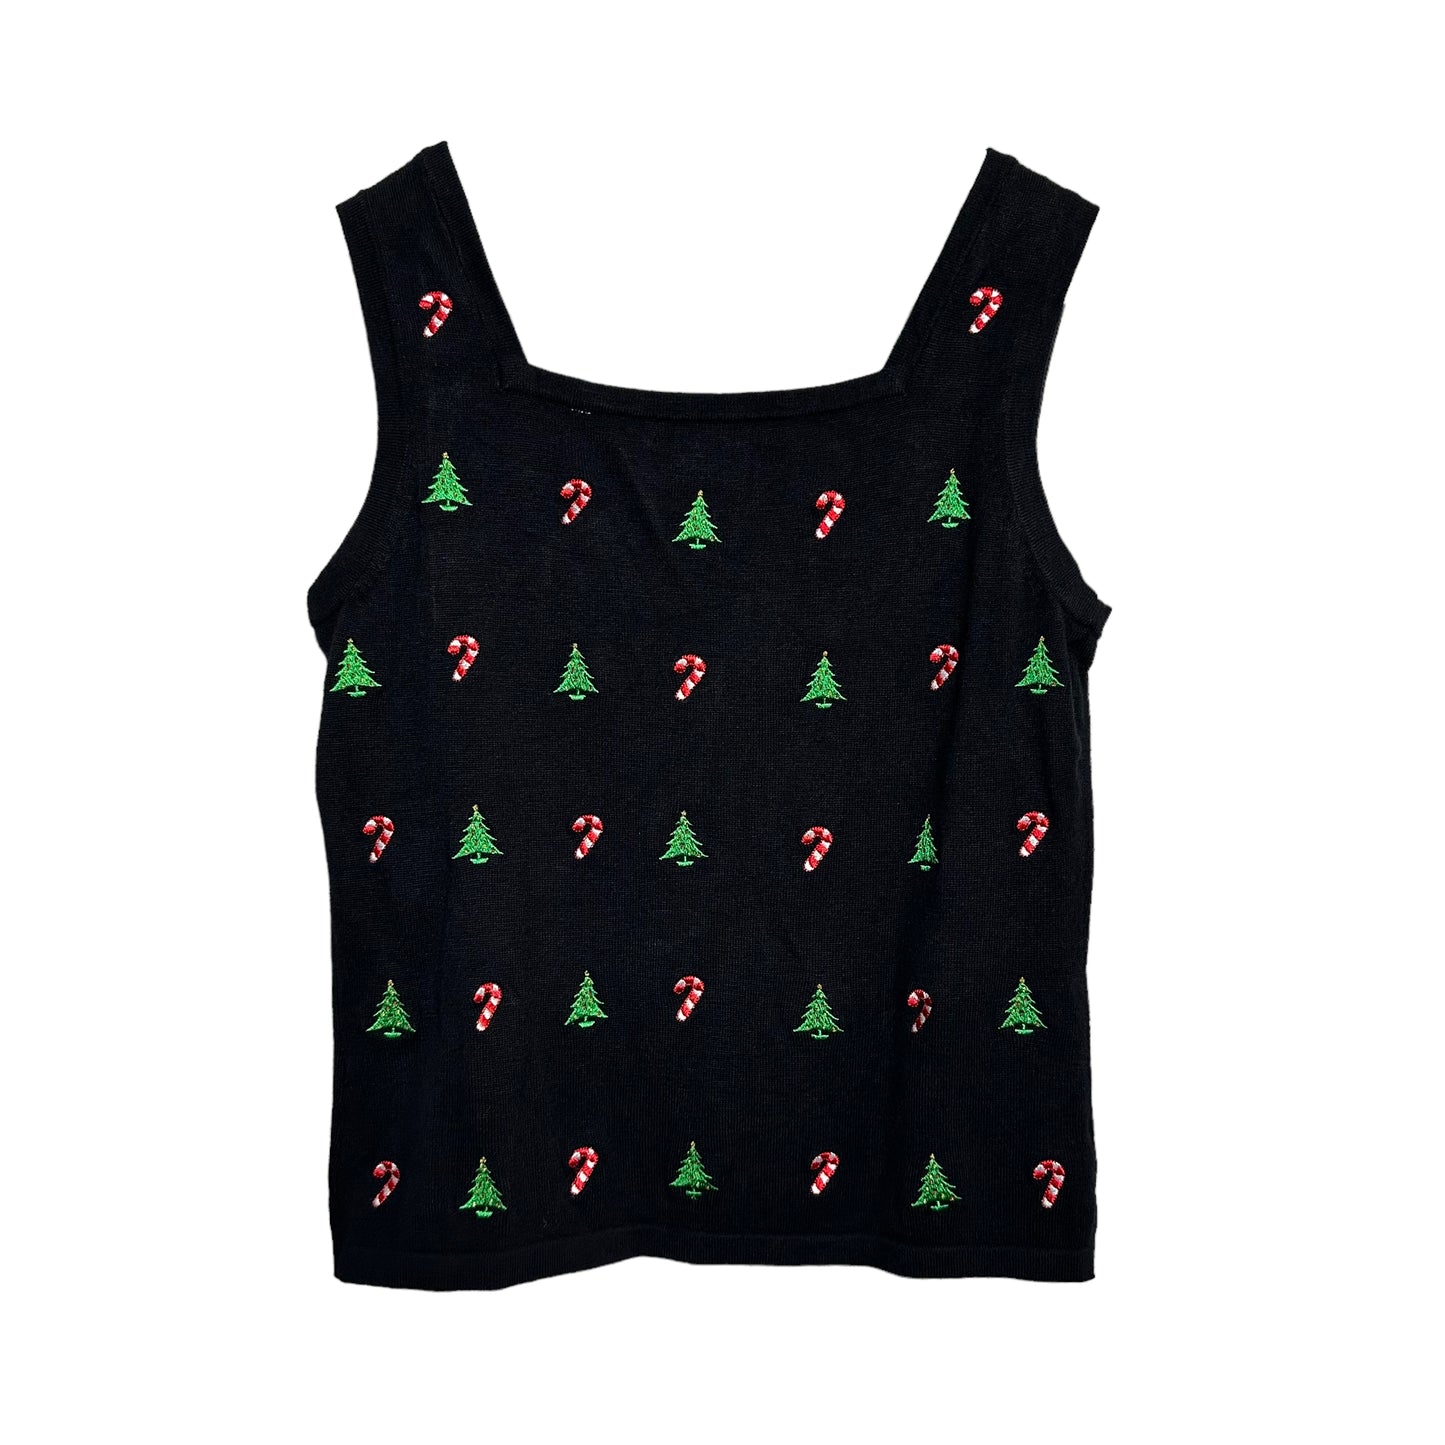 Erin Matthews Knit Christmas Cropped Tank Top Candy Cane and Trees Small